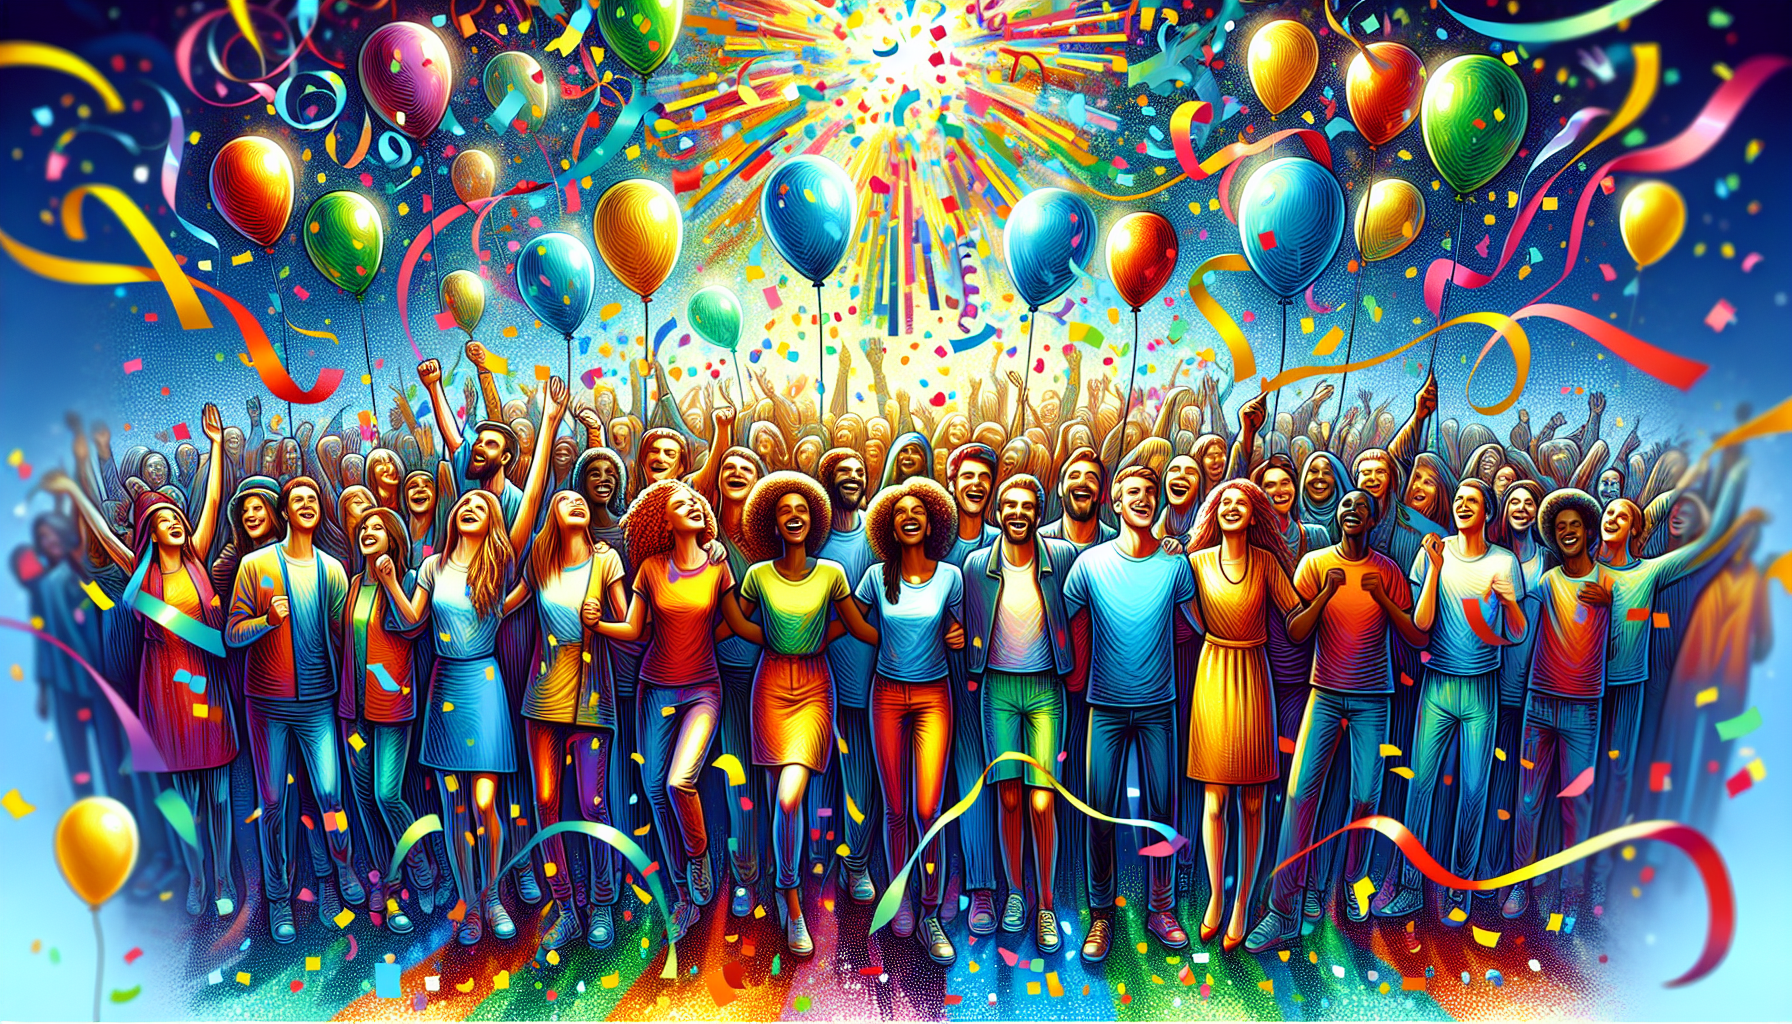 Illustration of a group of people celebrating with confetti and balloons